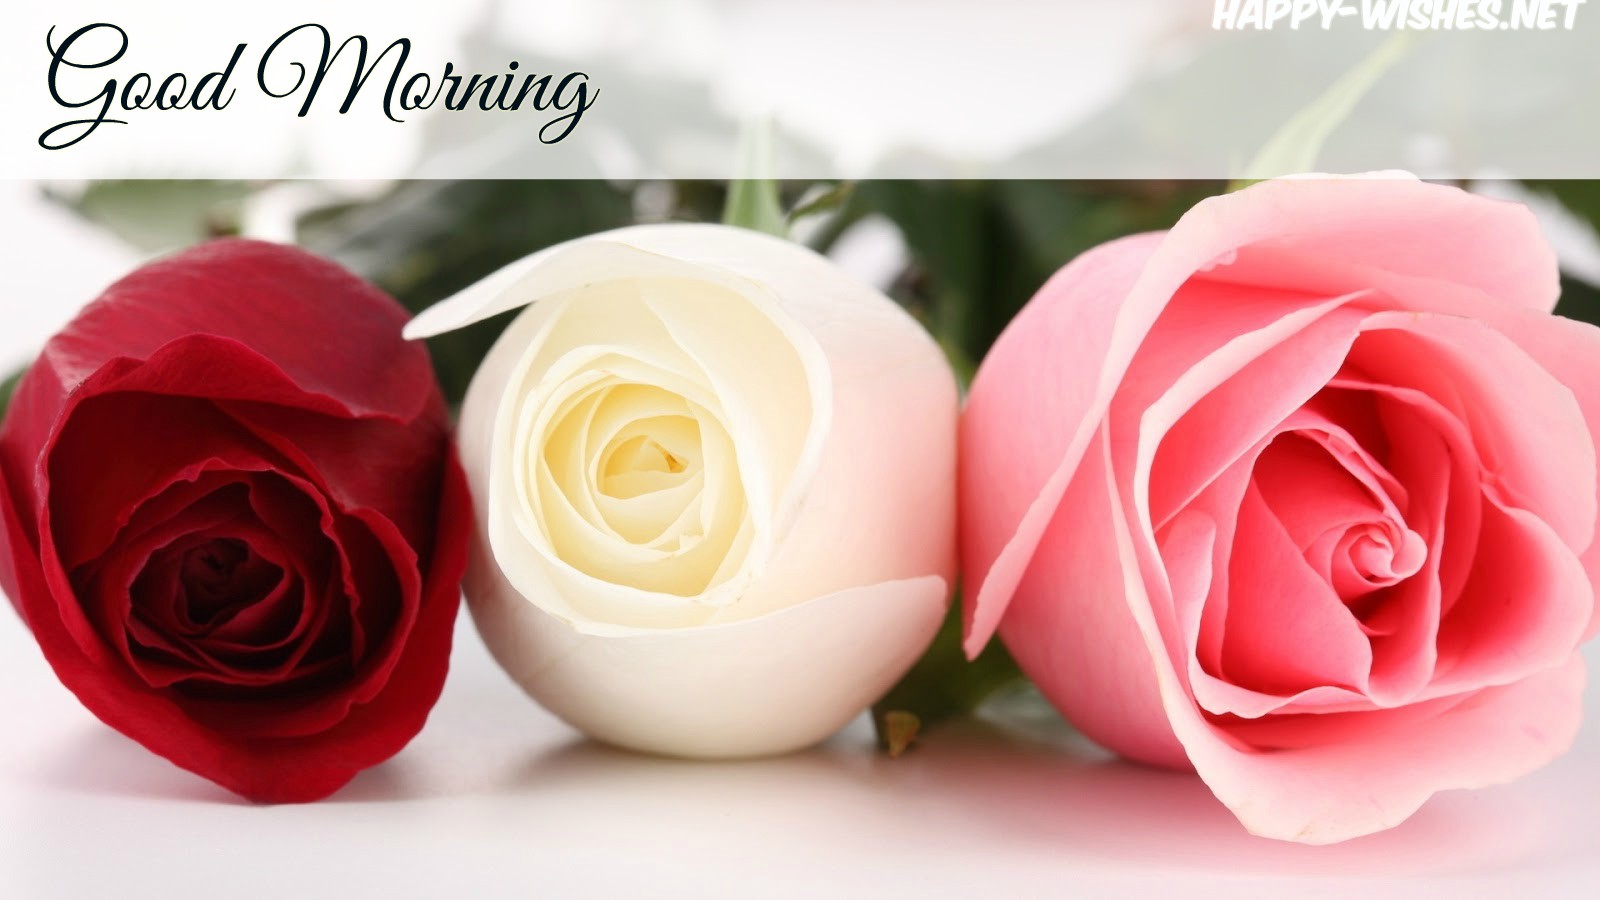 Awesome Good Morning - Rose With Good Morning - HD Wallpaper 